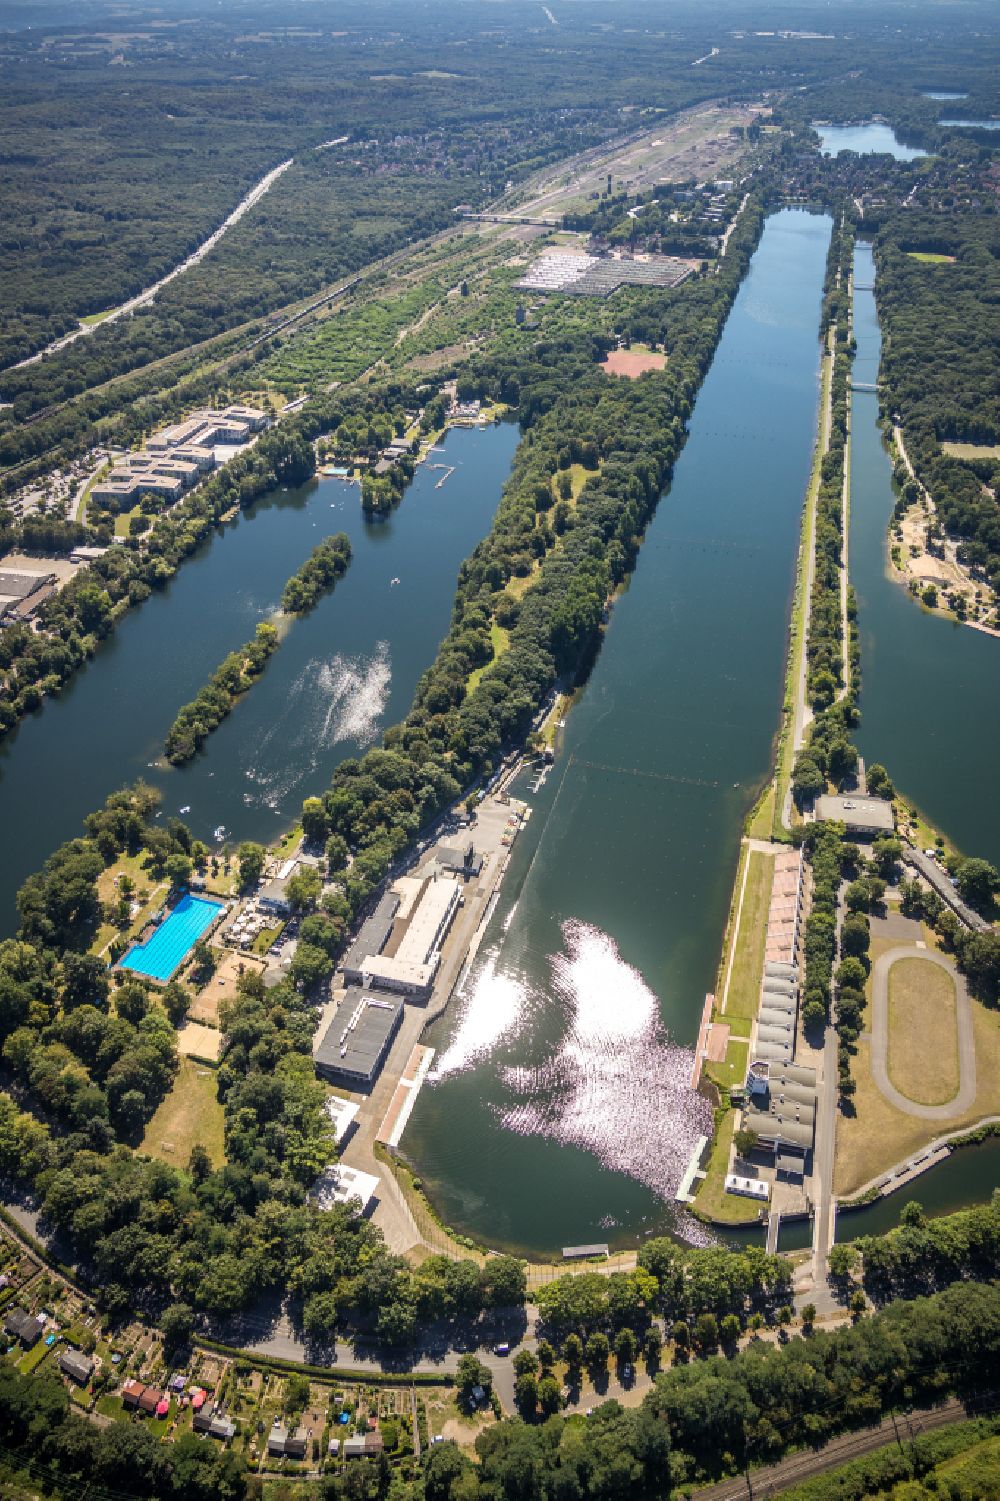 Duisburg from above - Sporting center of the regatta courses - Racetrack Bertasee Neuendorf-Sued - Regattabahn Duisburg in Duisburg at Ruhrgebiet in the state North Rhine-Westphalia